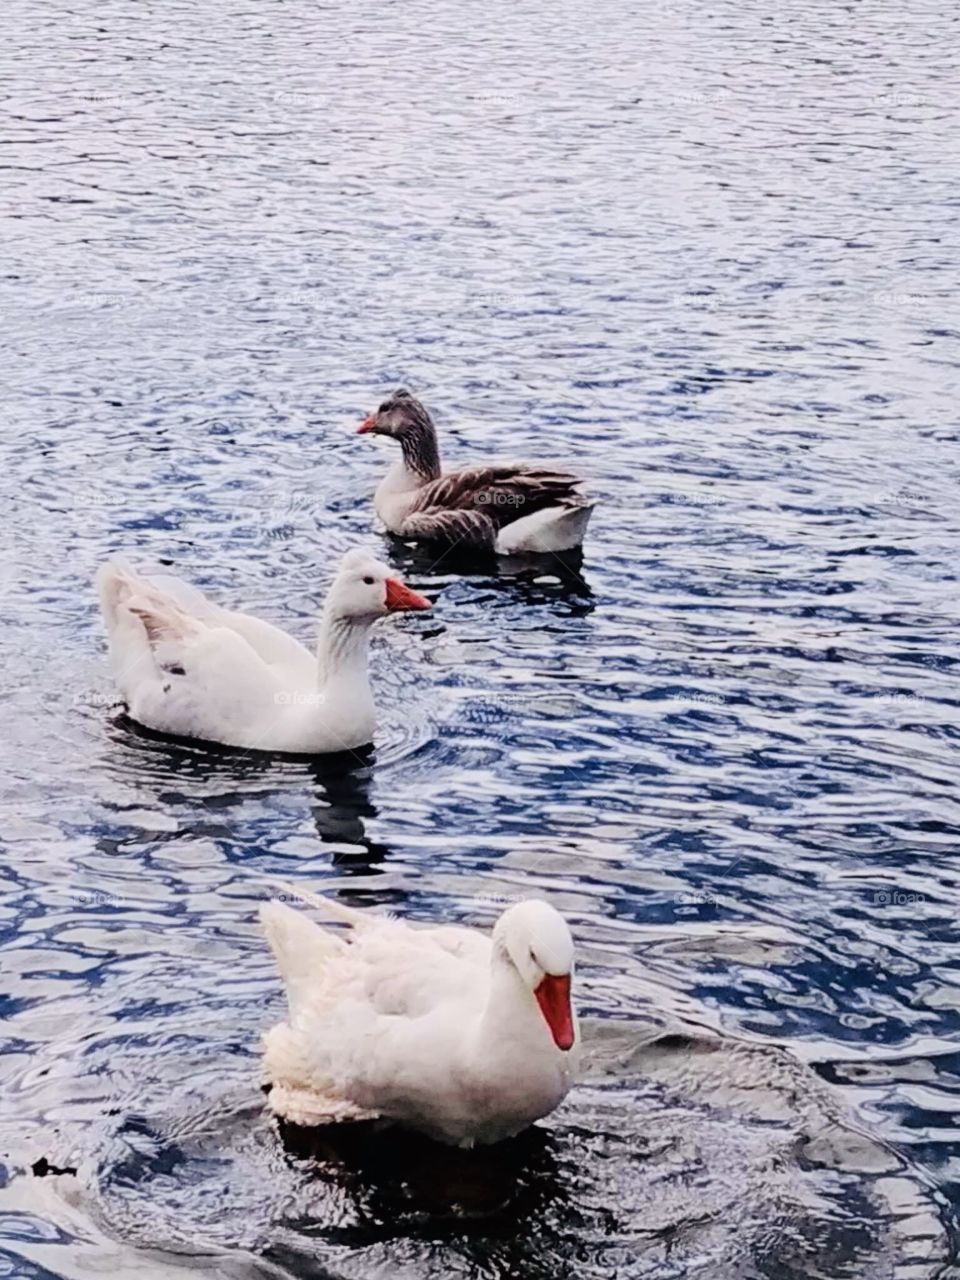 Geese and Ducks on the lake 